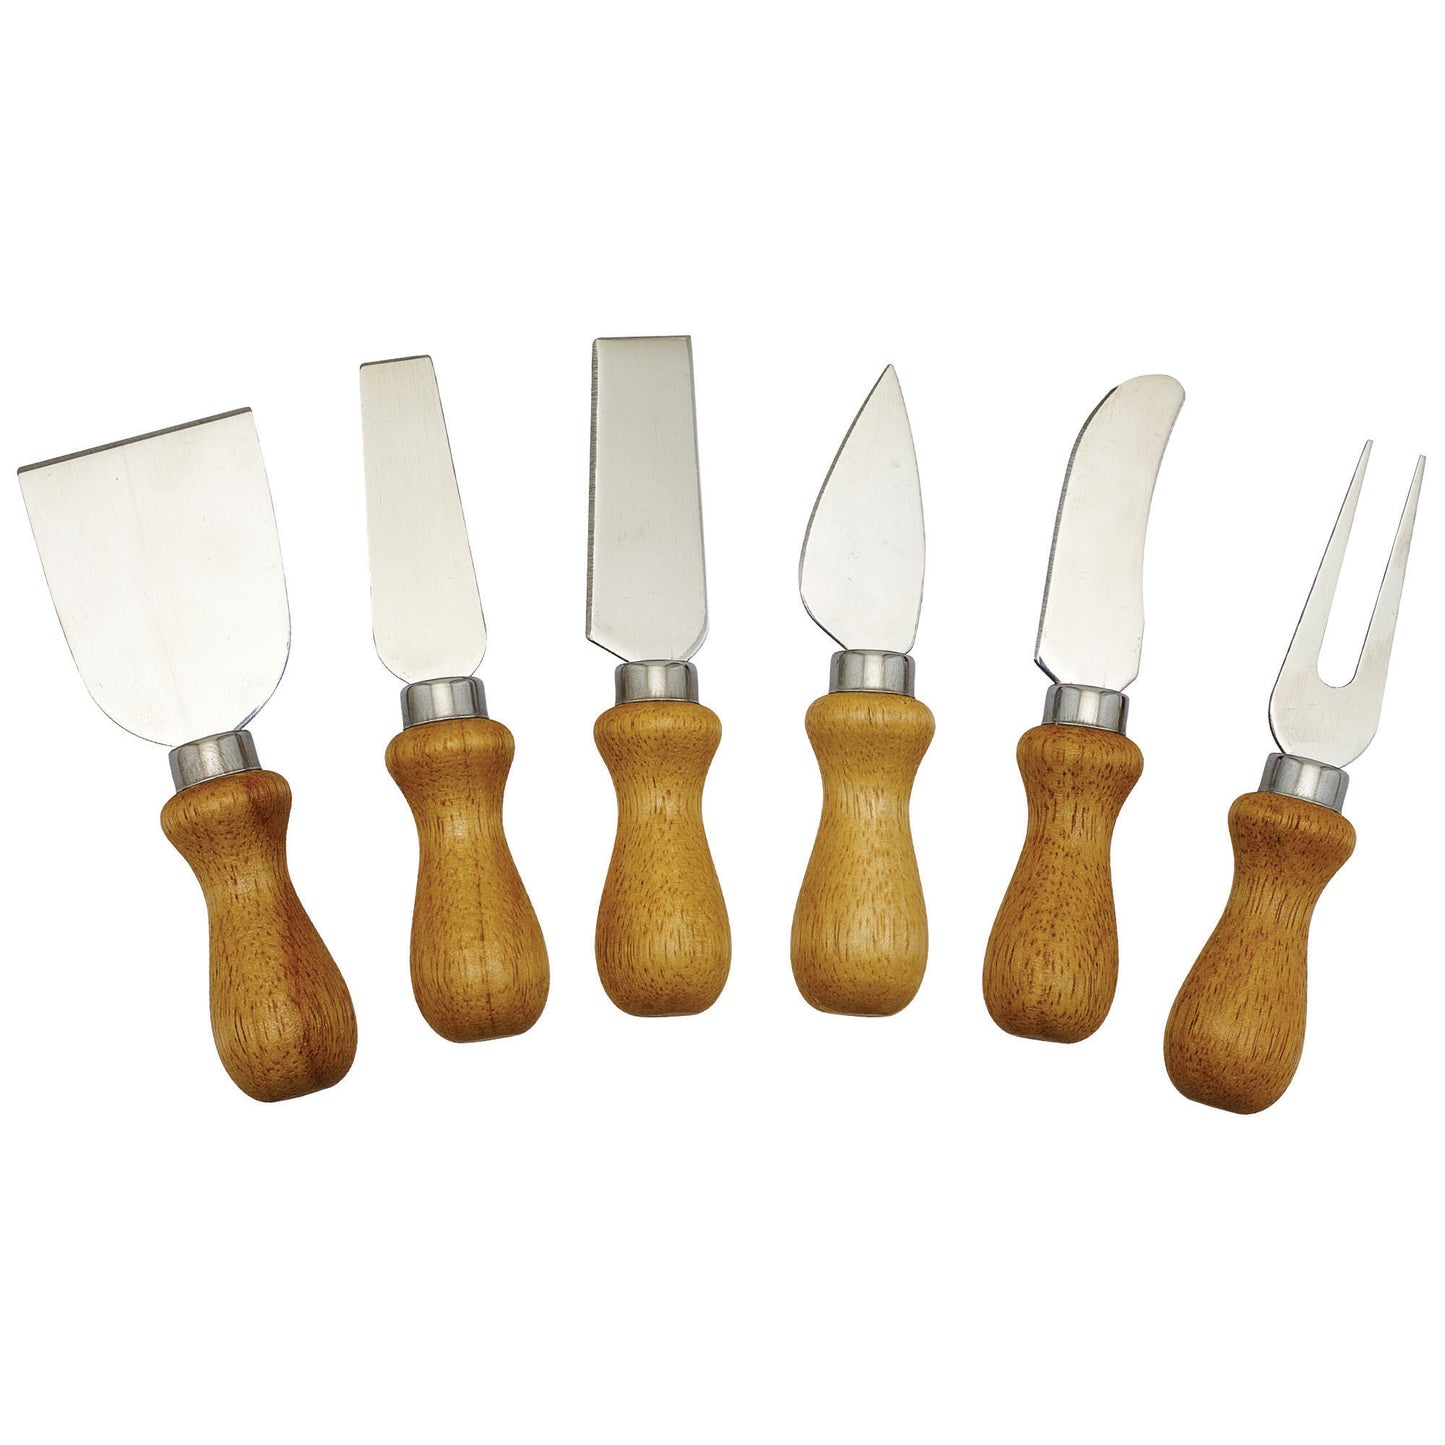 KCS-6W - Cheese Knife Set with Wooden Handles